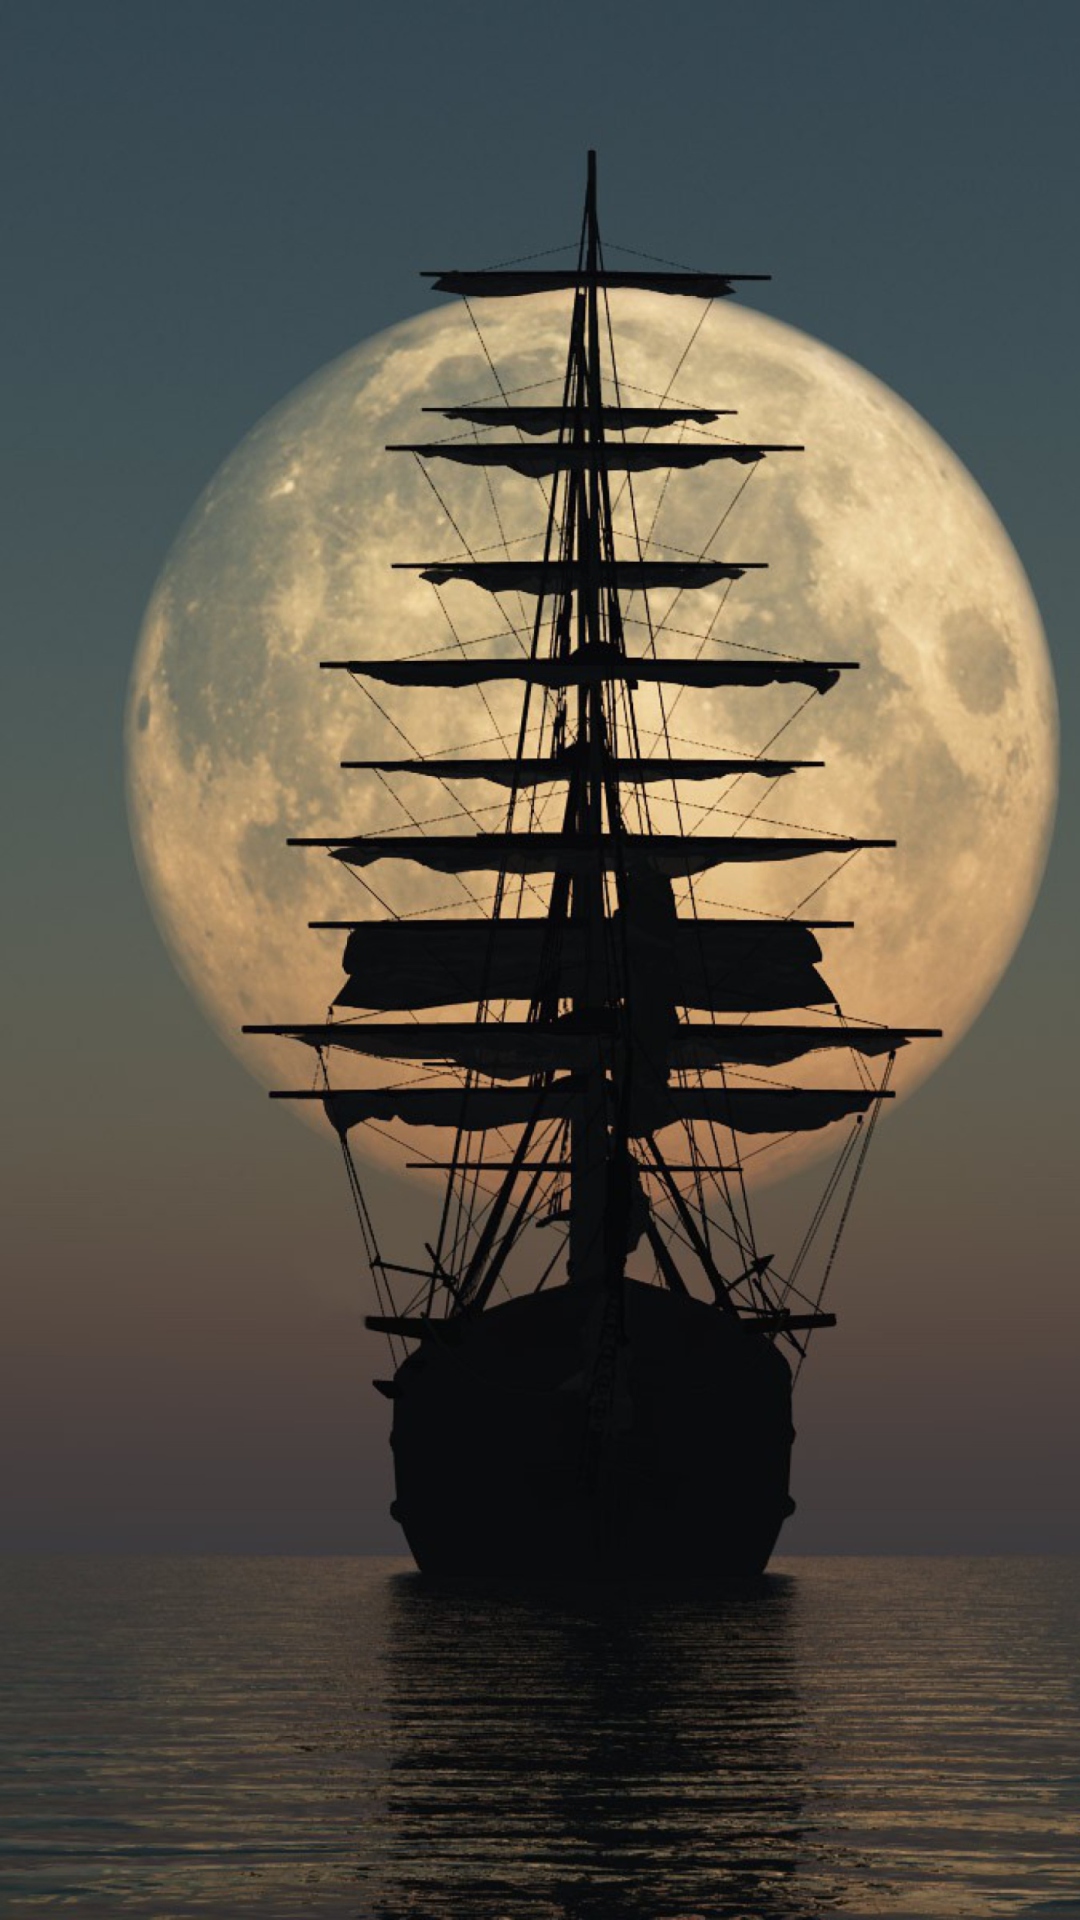 Ship Silhouette In Front Of Full Moon screenshot #1 1080x1920